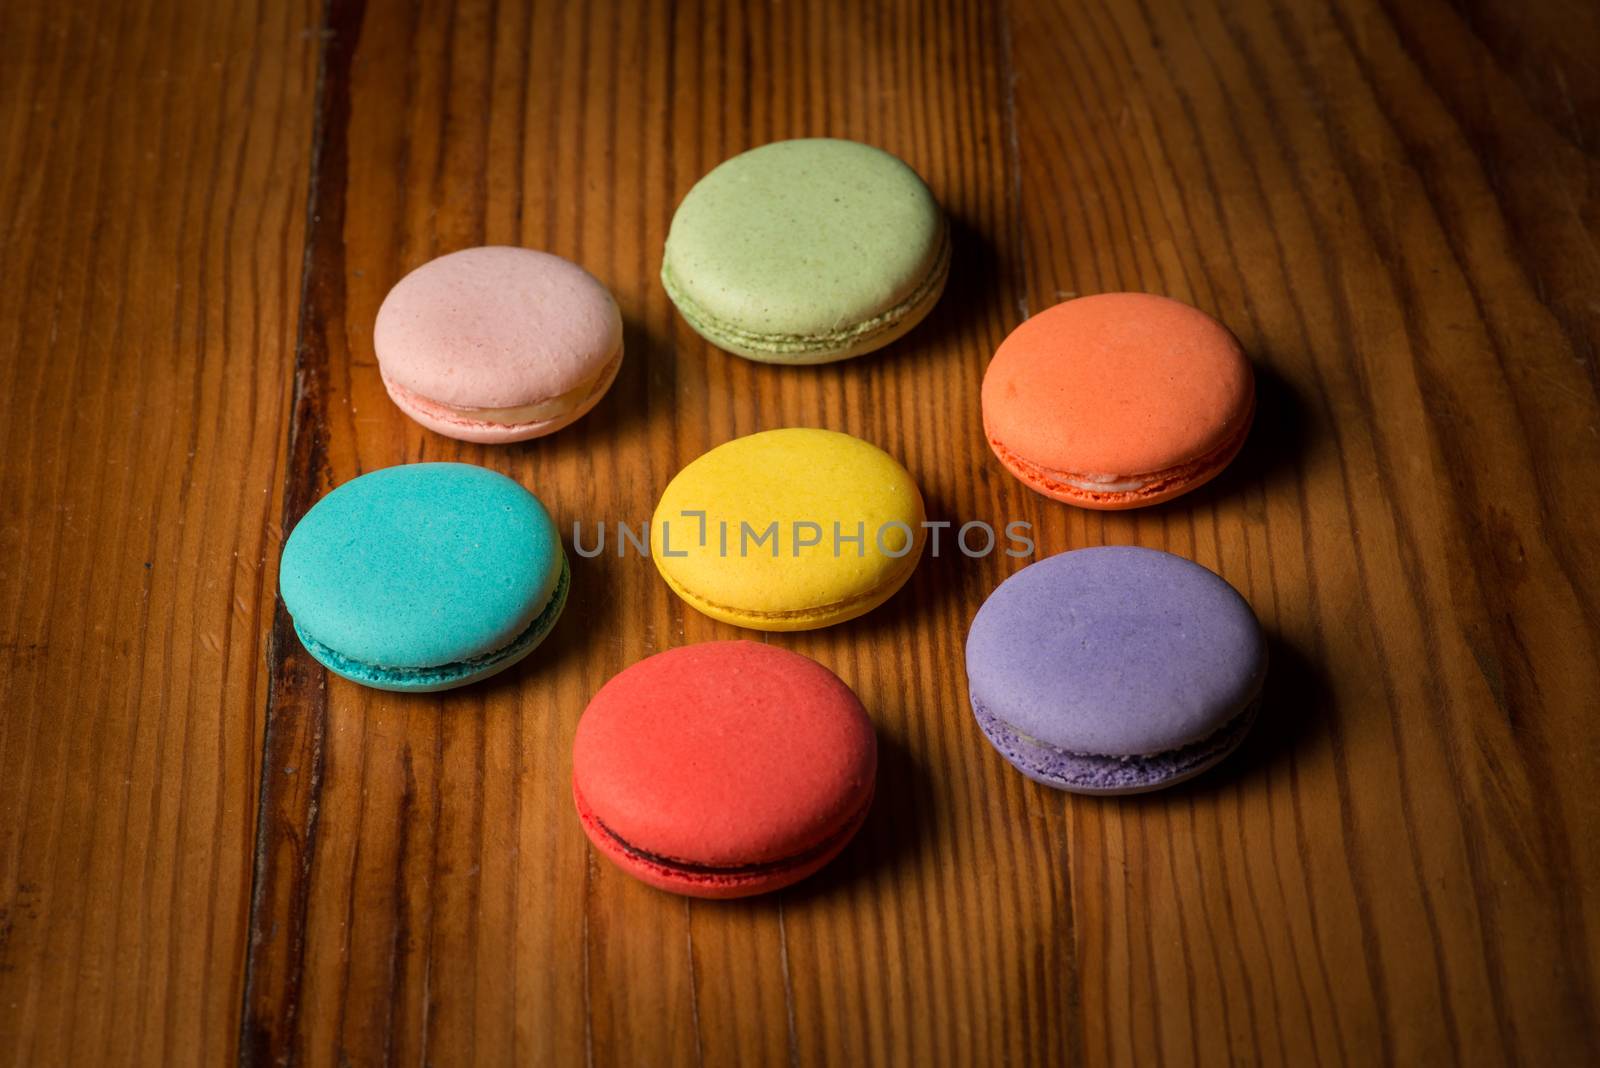 Macaroon variety by gregory21